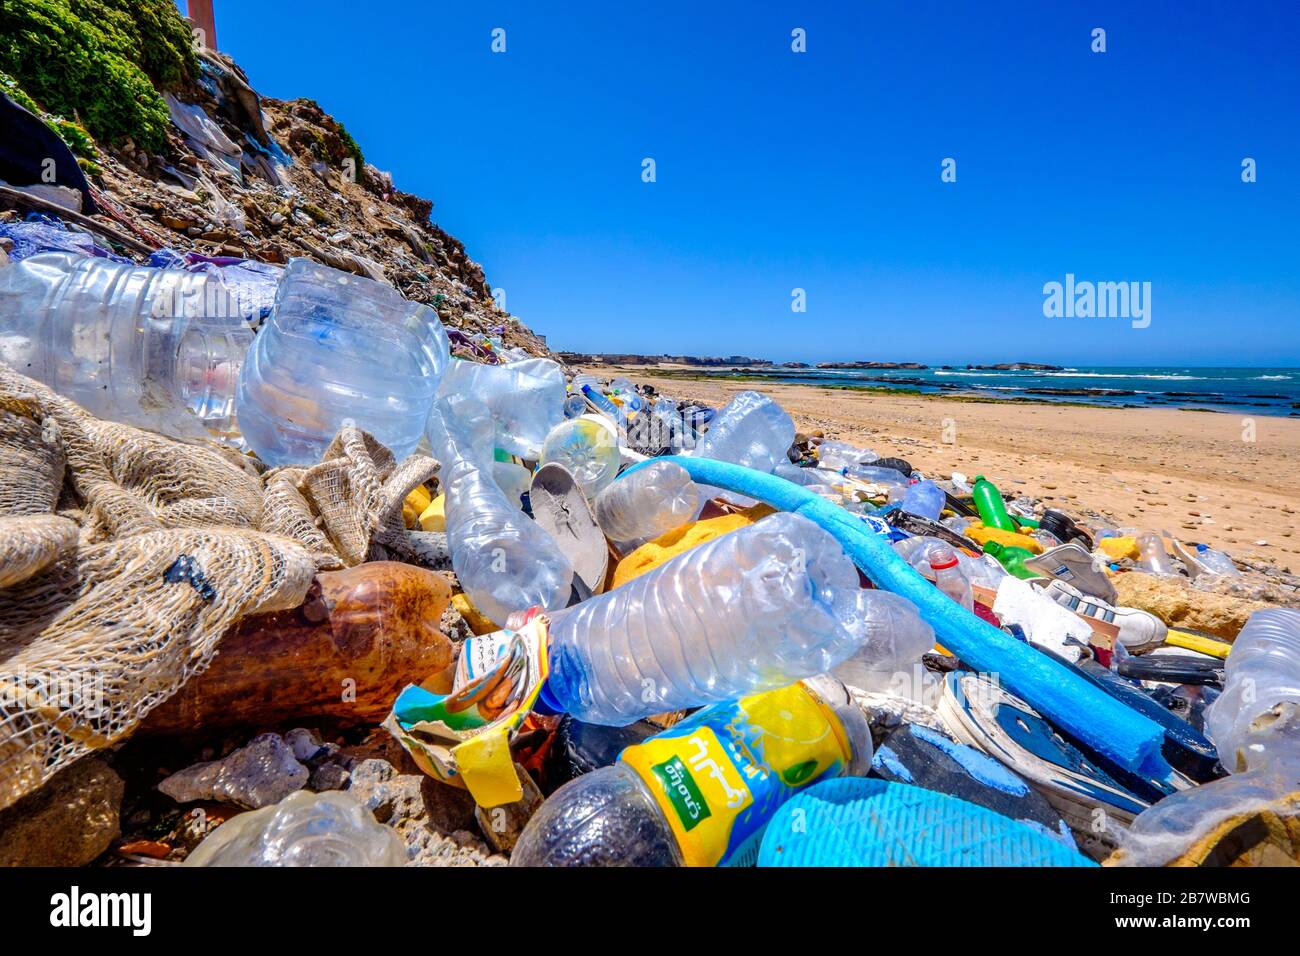 A pile of plastic water bottles and other waste on a Moroccan beach Stock Photo